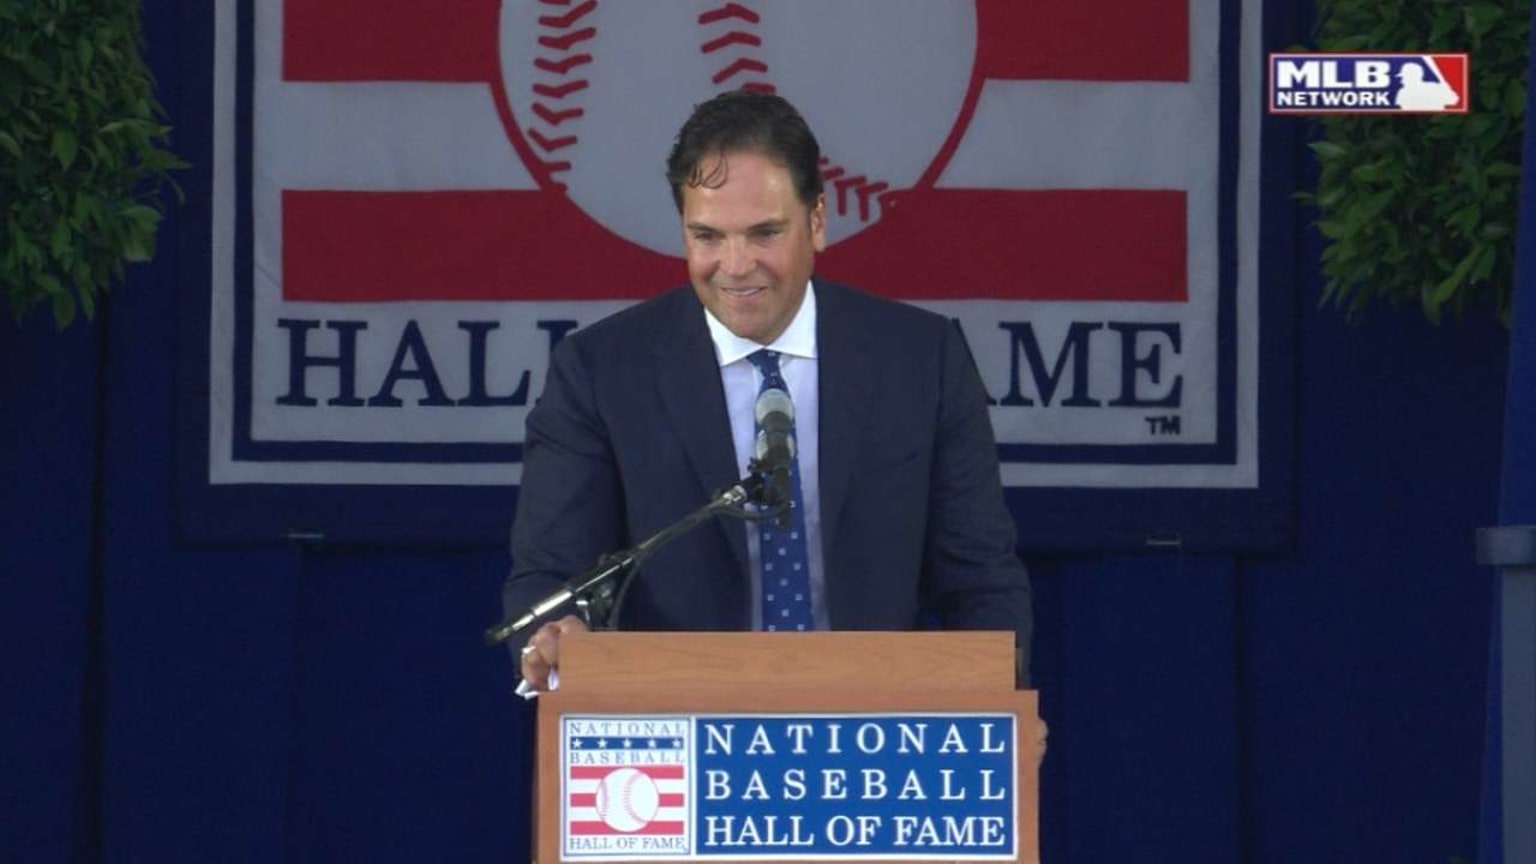 Mauer praises all in Twins Hall of Fame induction speech